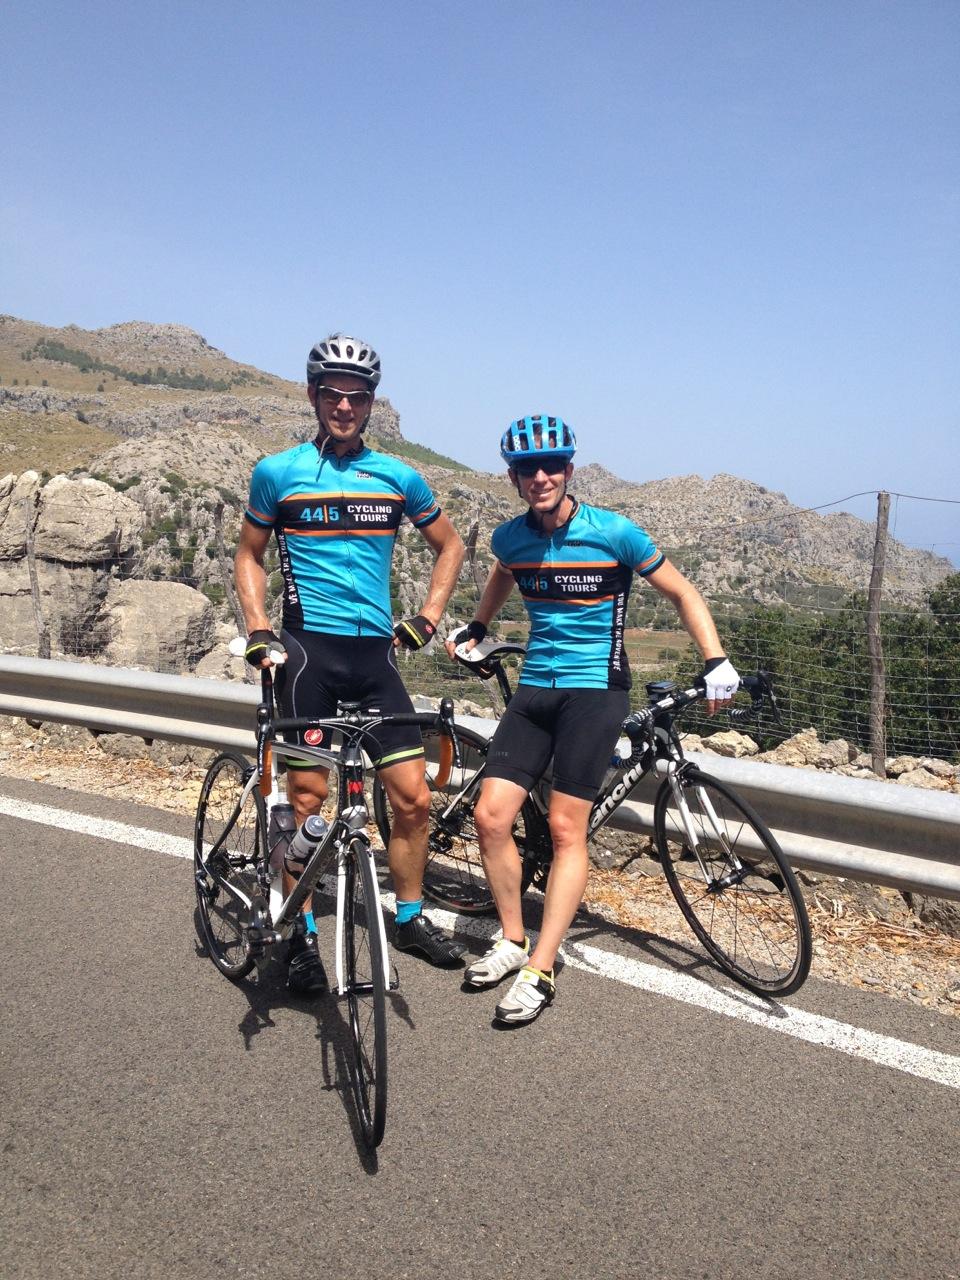 2019 Sea N Cycle Adventure Meet John and Gerry with 44 5 Cycling Tours JOHN HELMKAMPF After a year of study abroad in Montpellier, way back when, John knew he d return to the south of France someday.